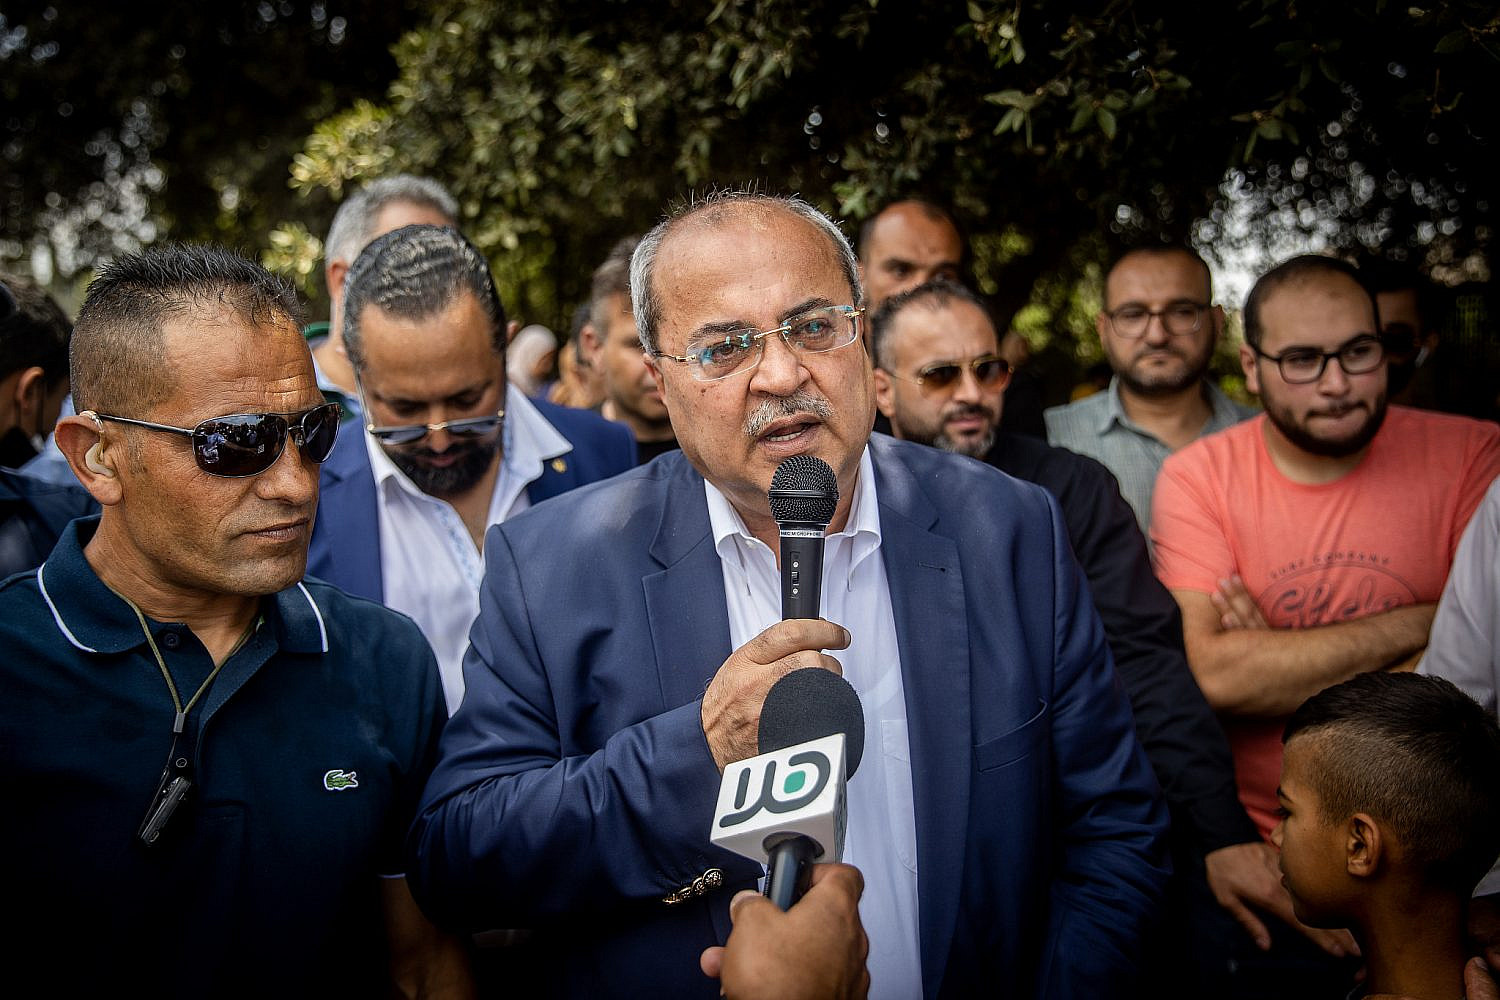 MK Ahmad Tibi speaks during a protest against the Citizenship Law, also known as the Ban on Family Reunification Law, outside the Knesset in Jerusalem, July 5, 2021. (Yonatan Sindel/Flash90)